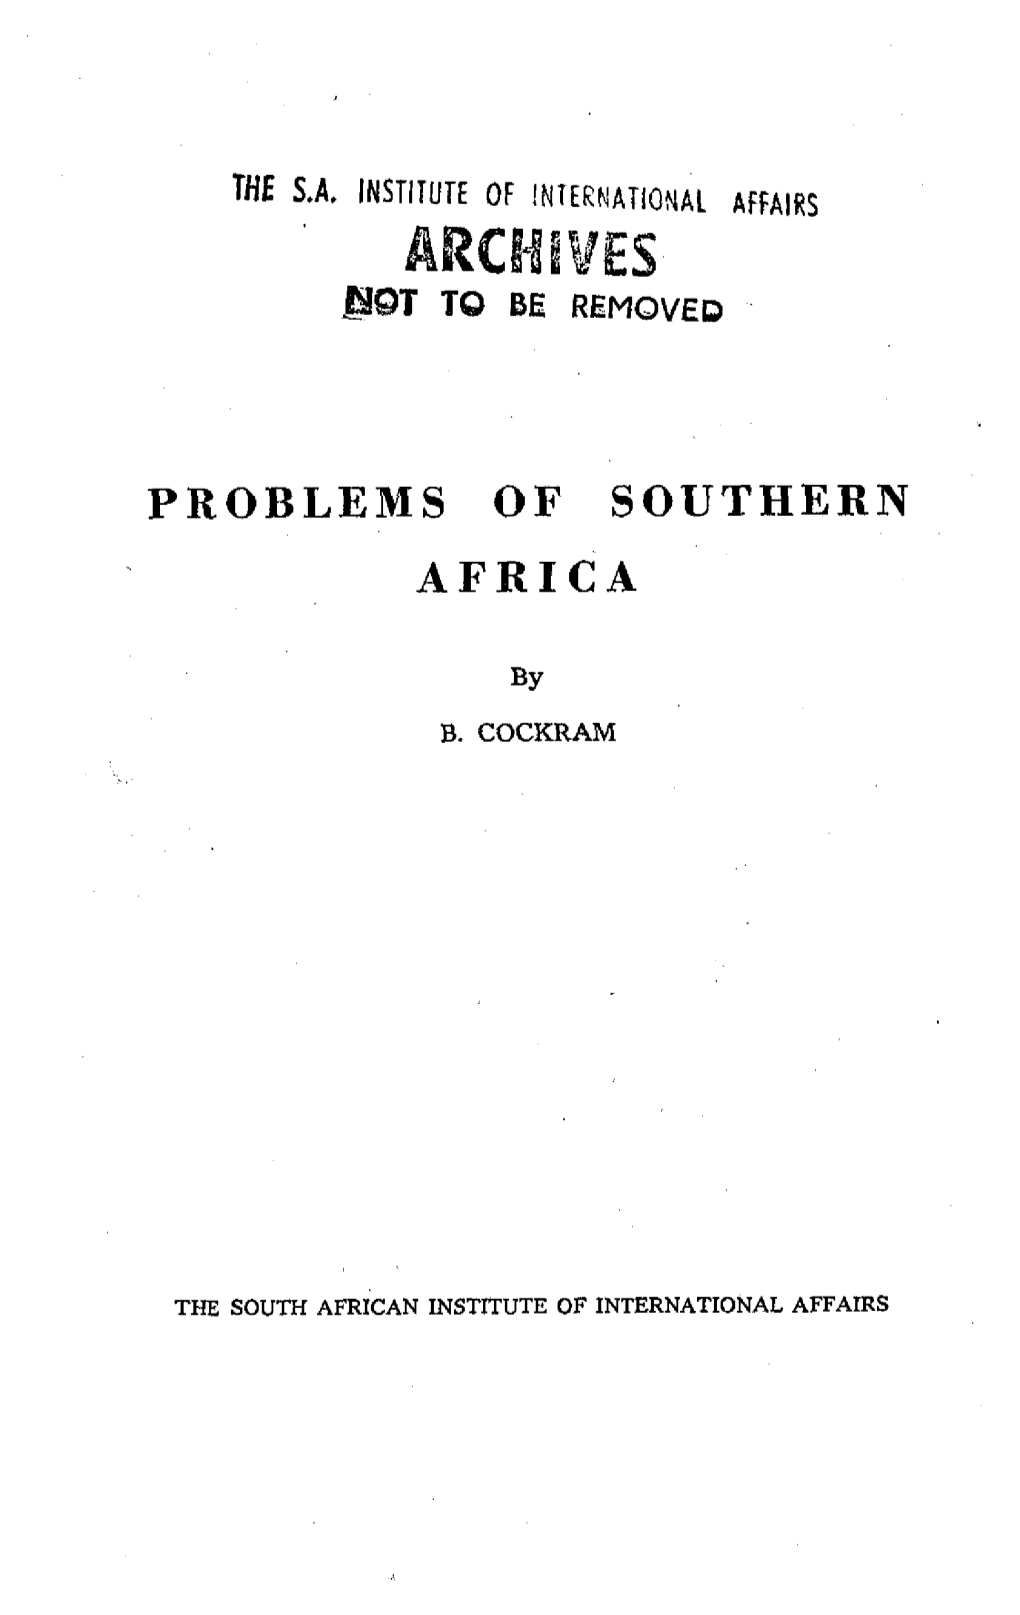 Problems of Southern Africa